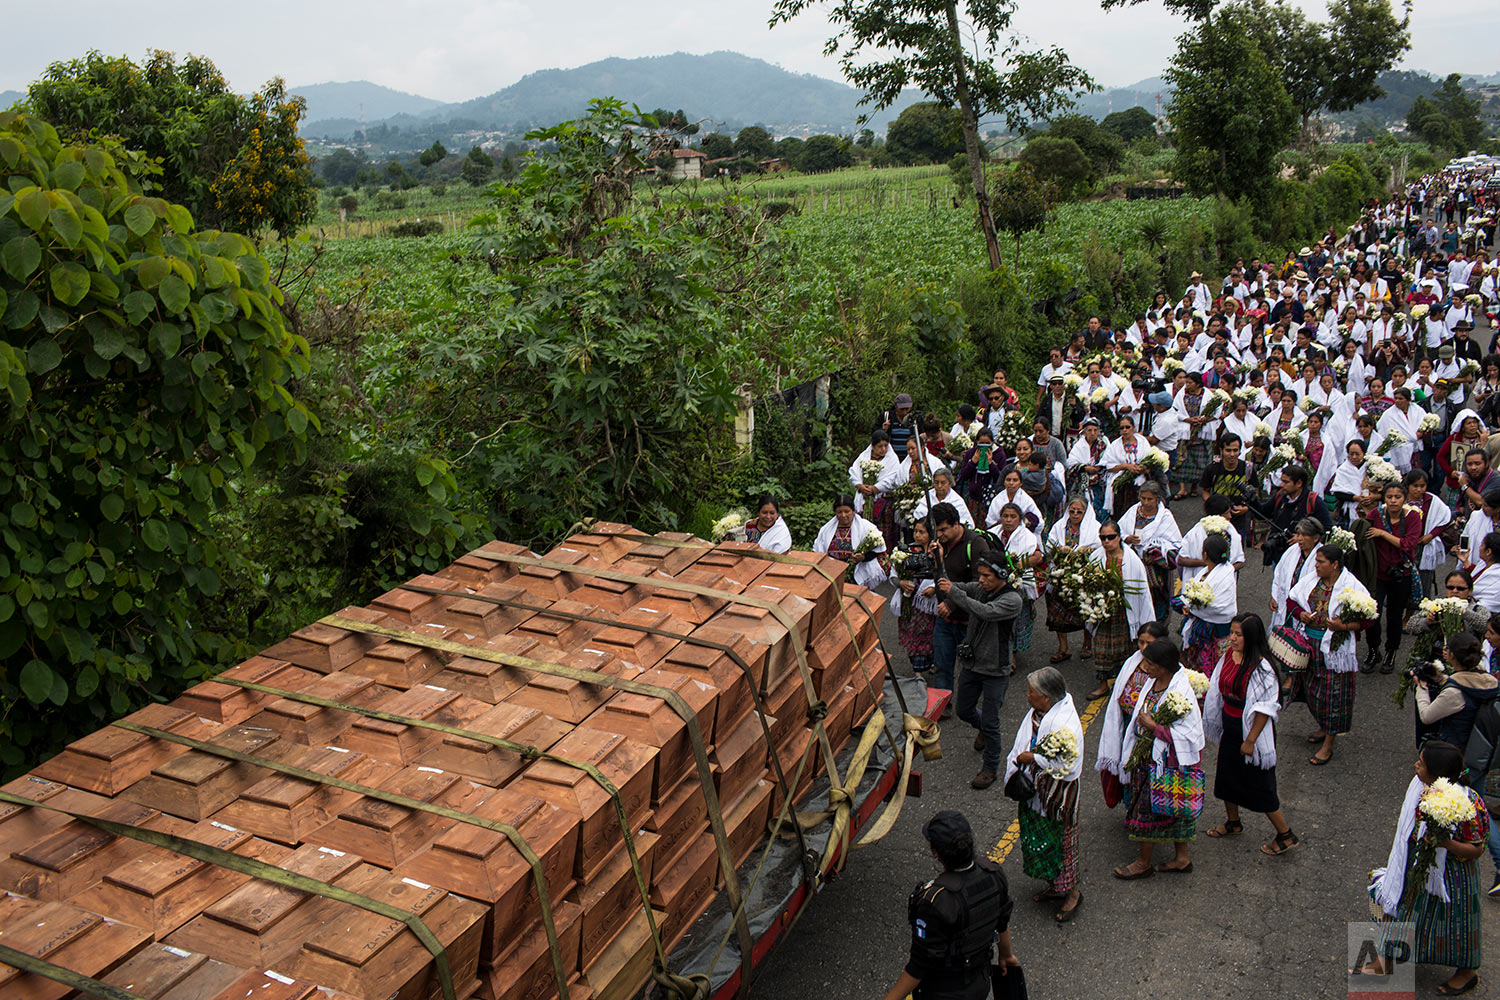  In this June 21, 2018 photo, villagers walk behind coffins during the funeral procession for 172 unidentified people who were exhumed from what was once a military camp, before burying them in the same area where they were discovered in San Juan Com